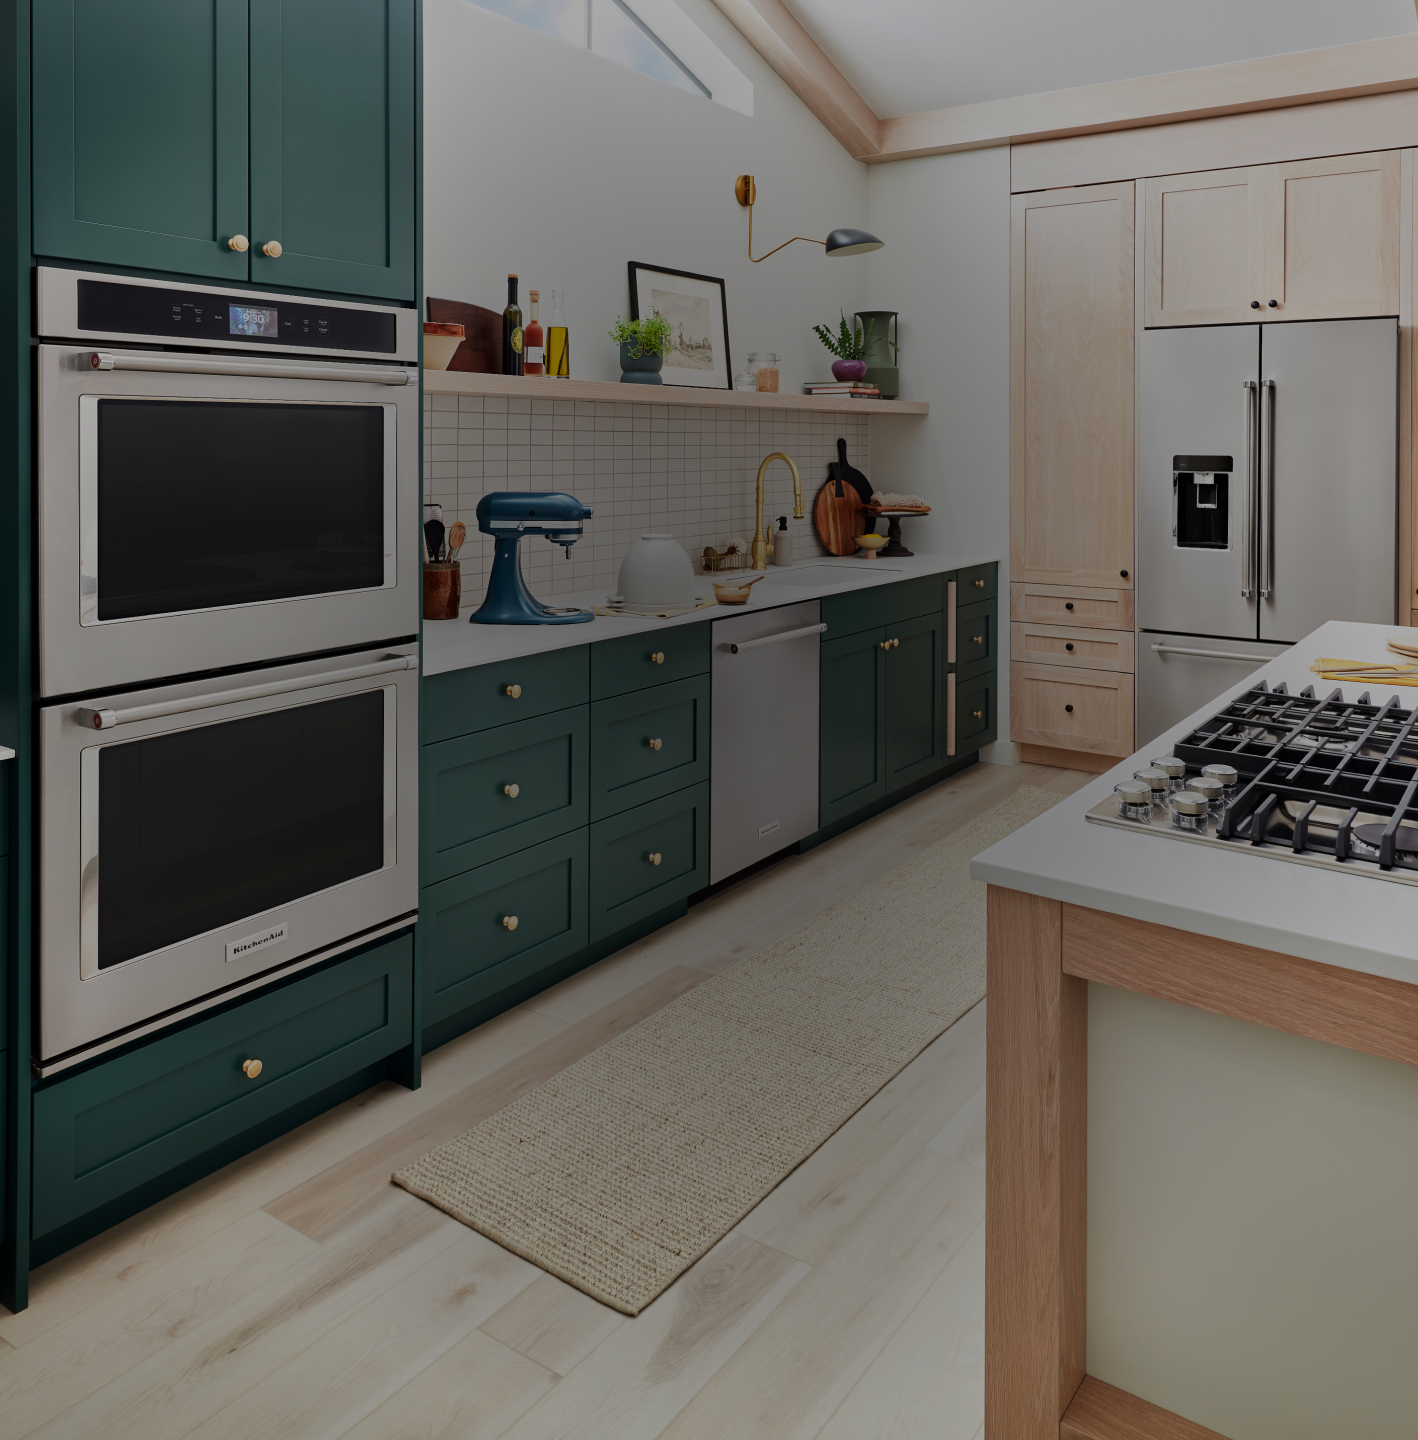 A kitchen with green cabinets and KitchenAid® appliances.